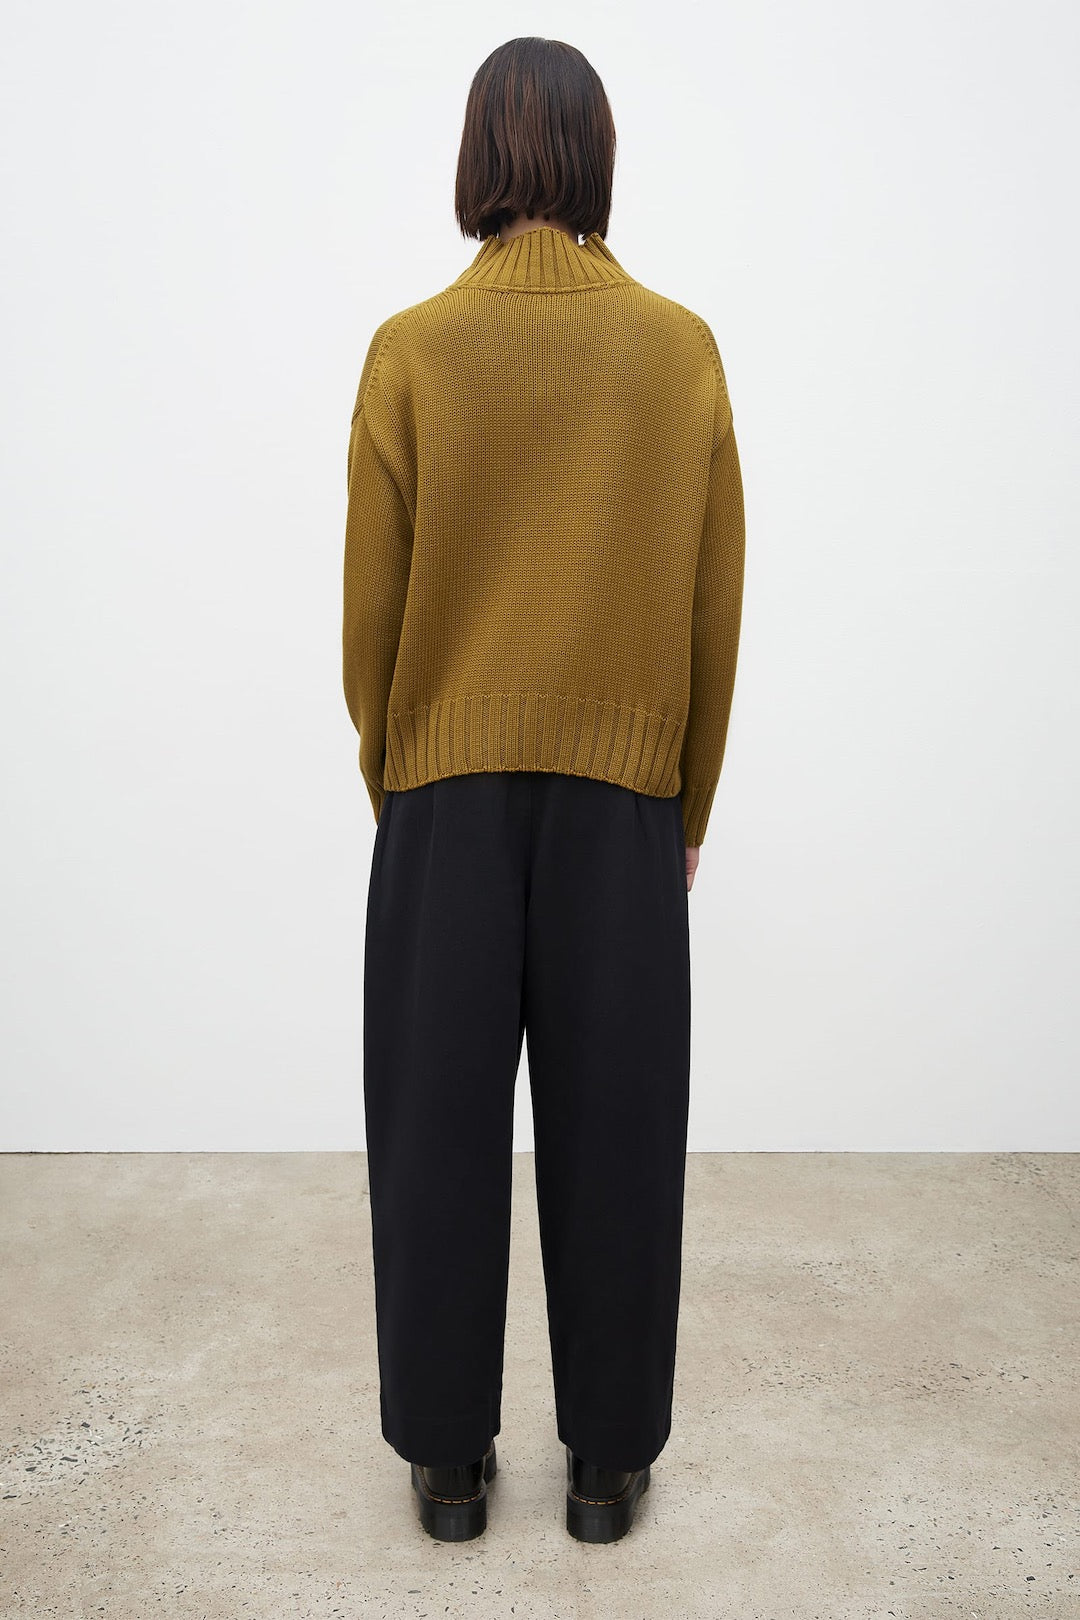 The back view of a woman wearing a Kowtow Staple Sweater – Chartreuse and black trousers.